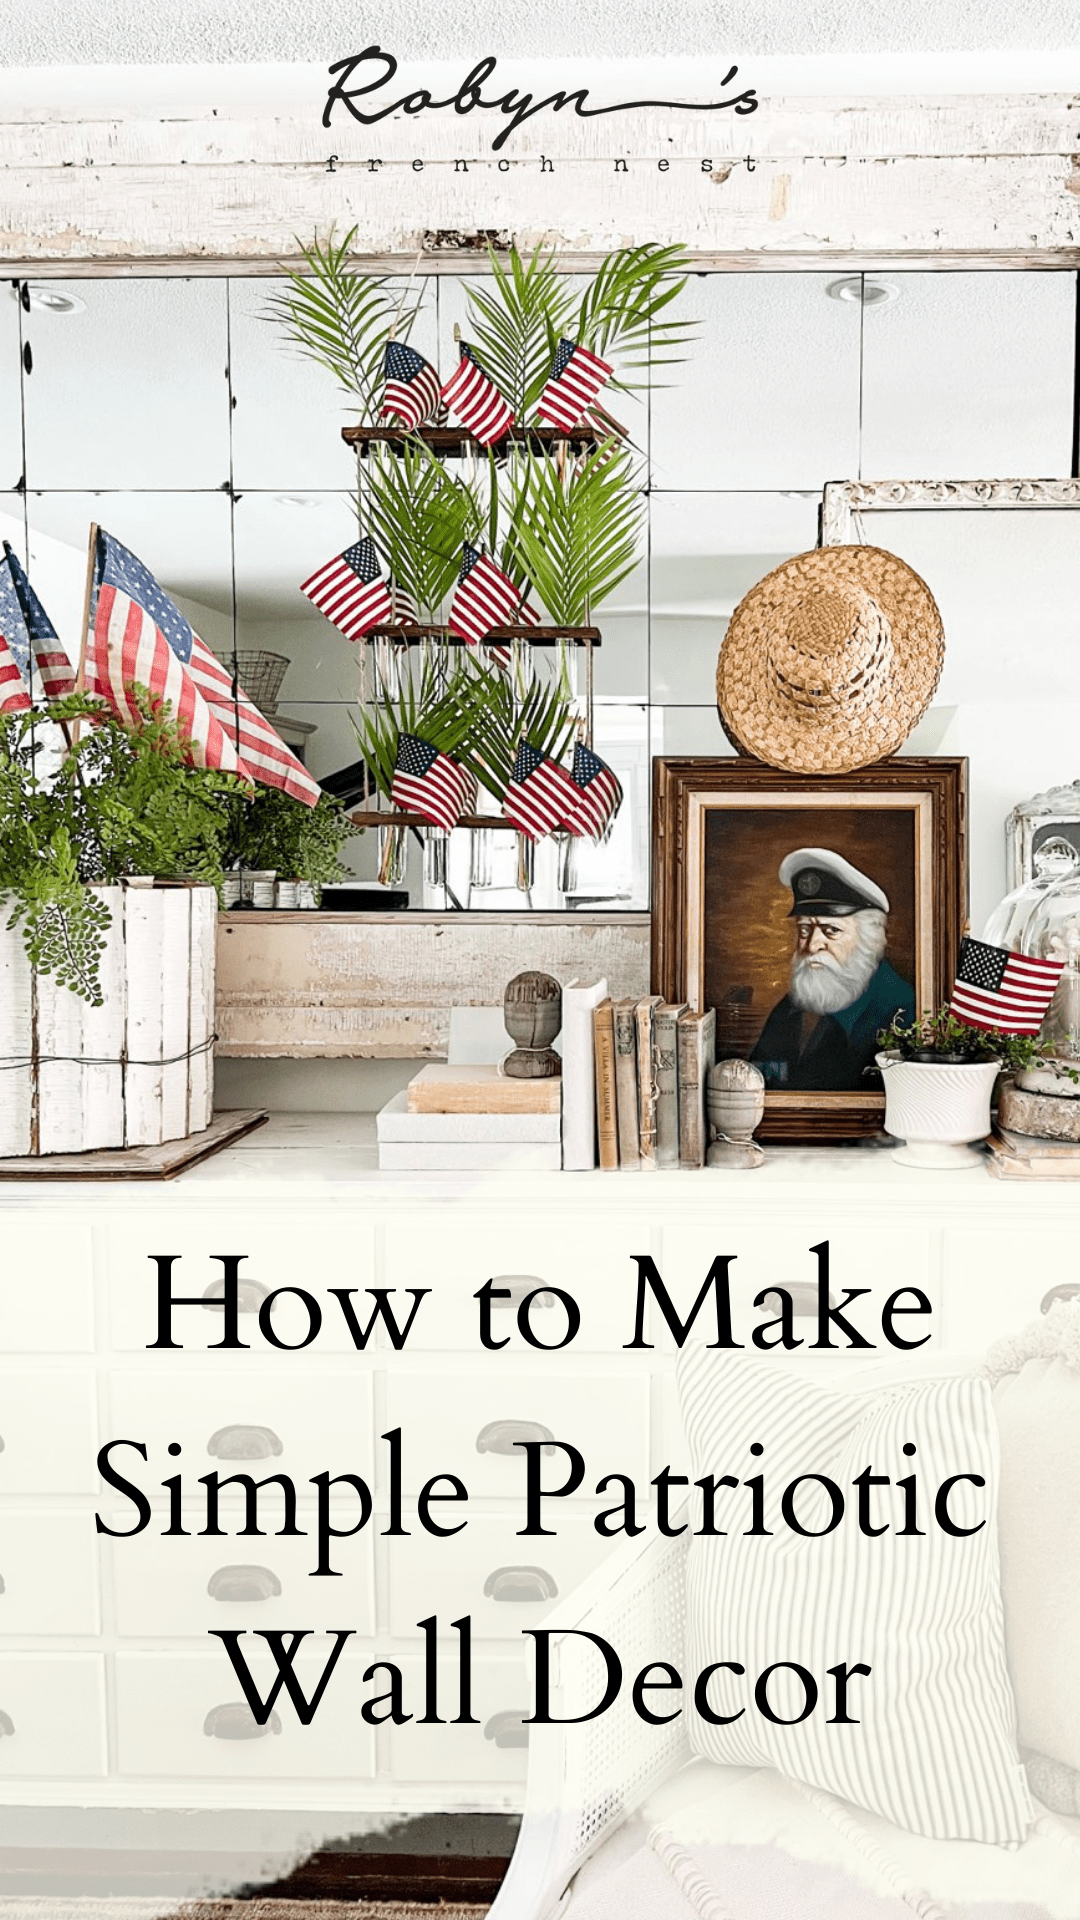 How to Make Simple Patriotic Wall Decor